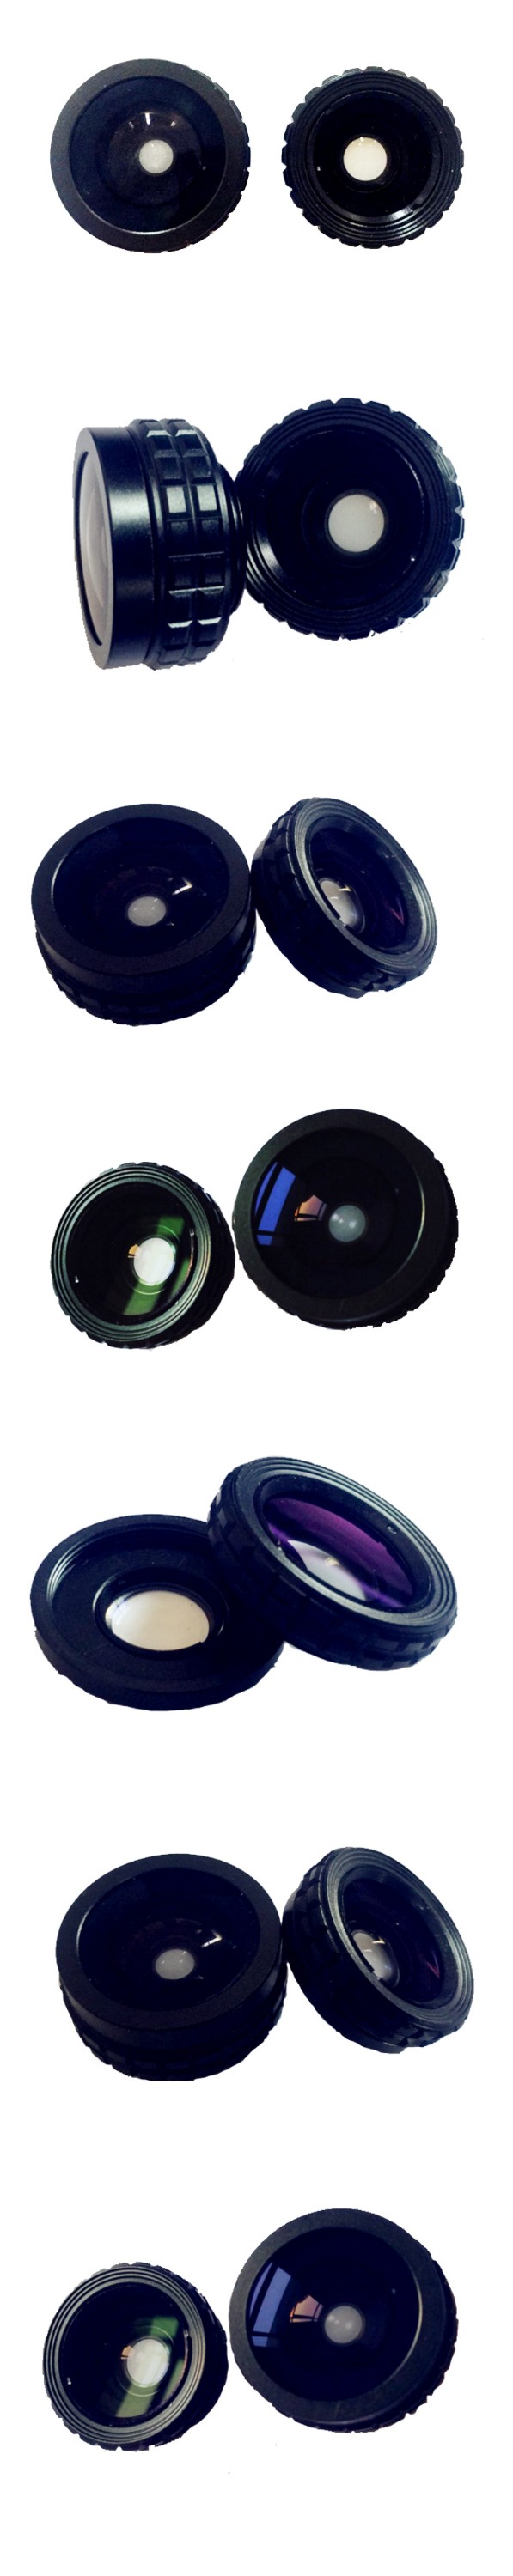 Universal clip 3 In 1 wide Angle Macro Fisheye Mobile Phone Camera zoom Lens For sony mobile phone lens